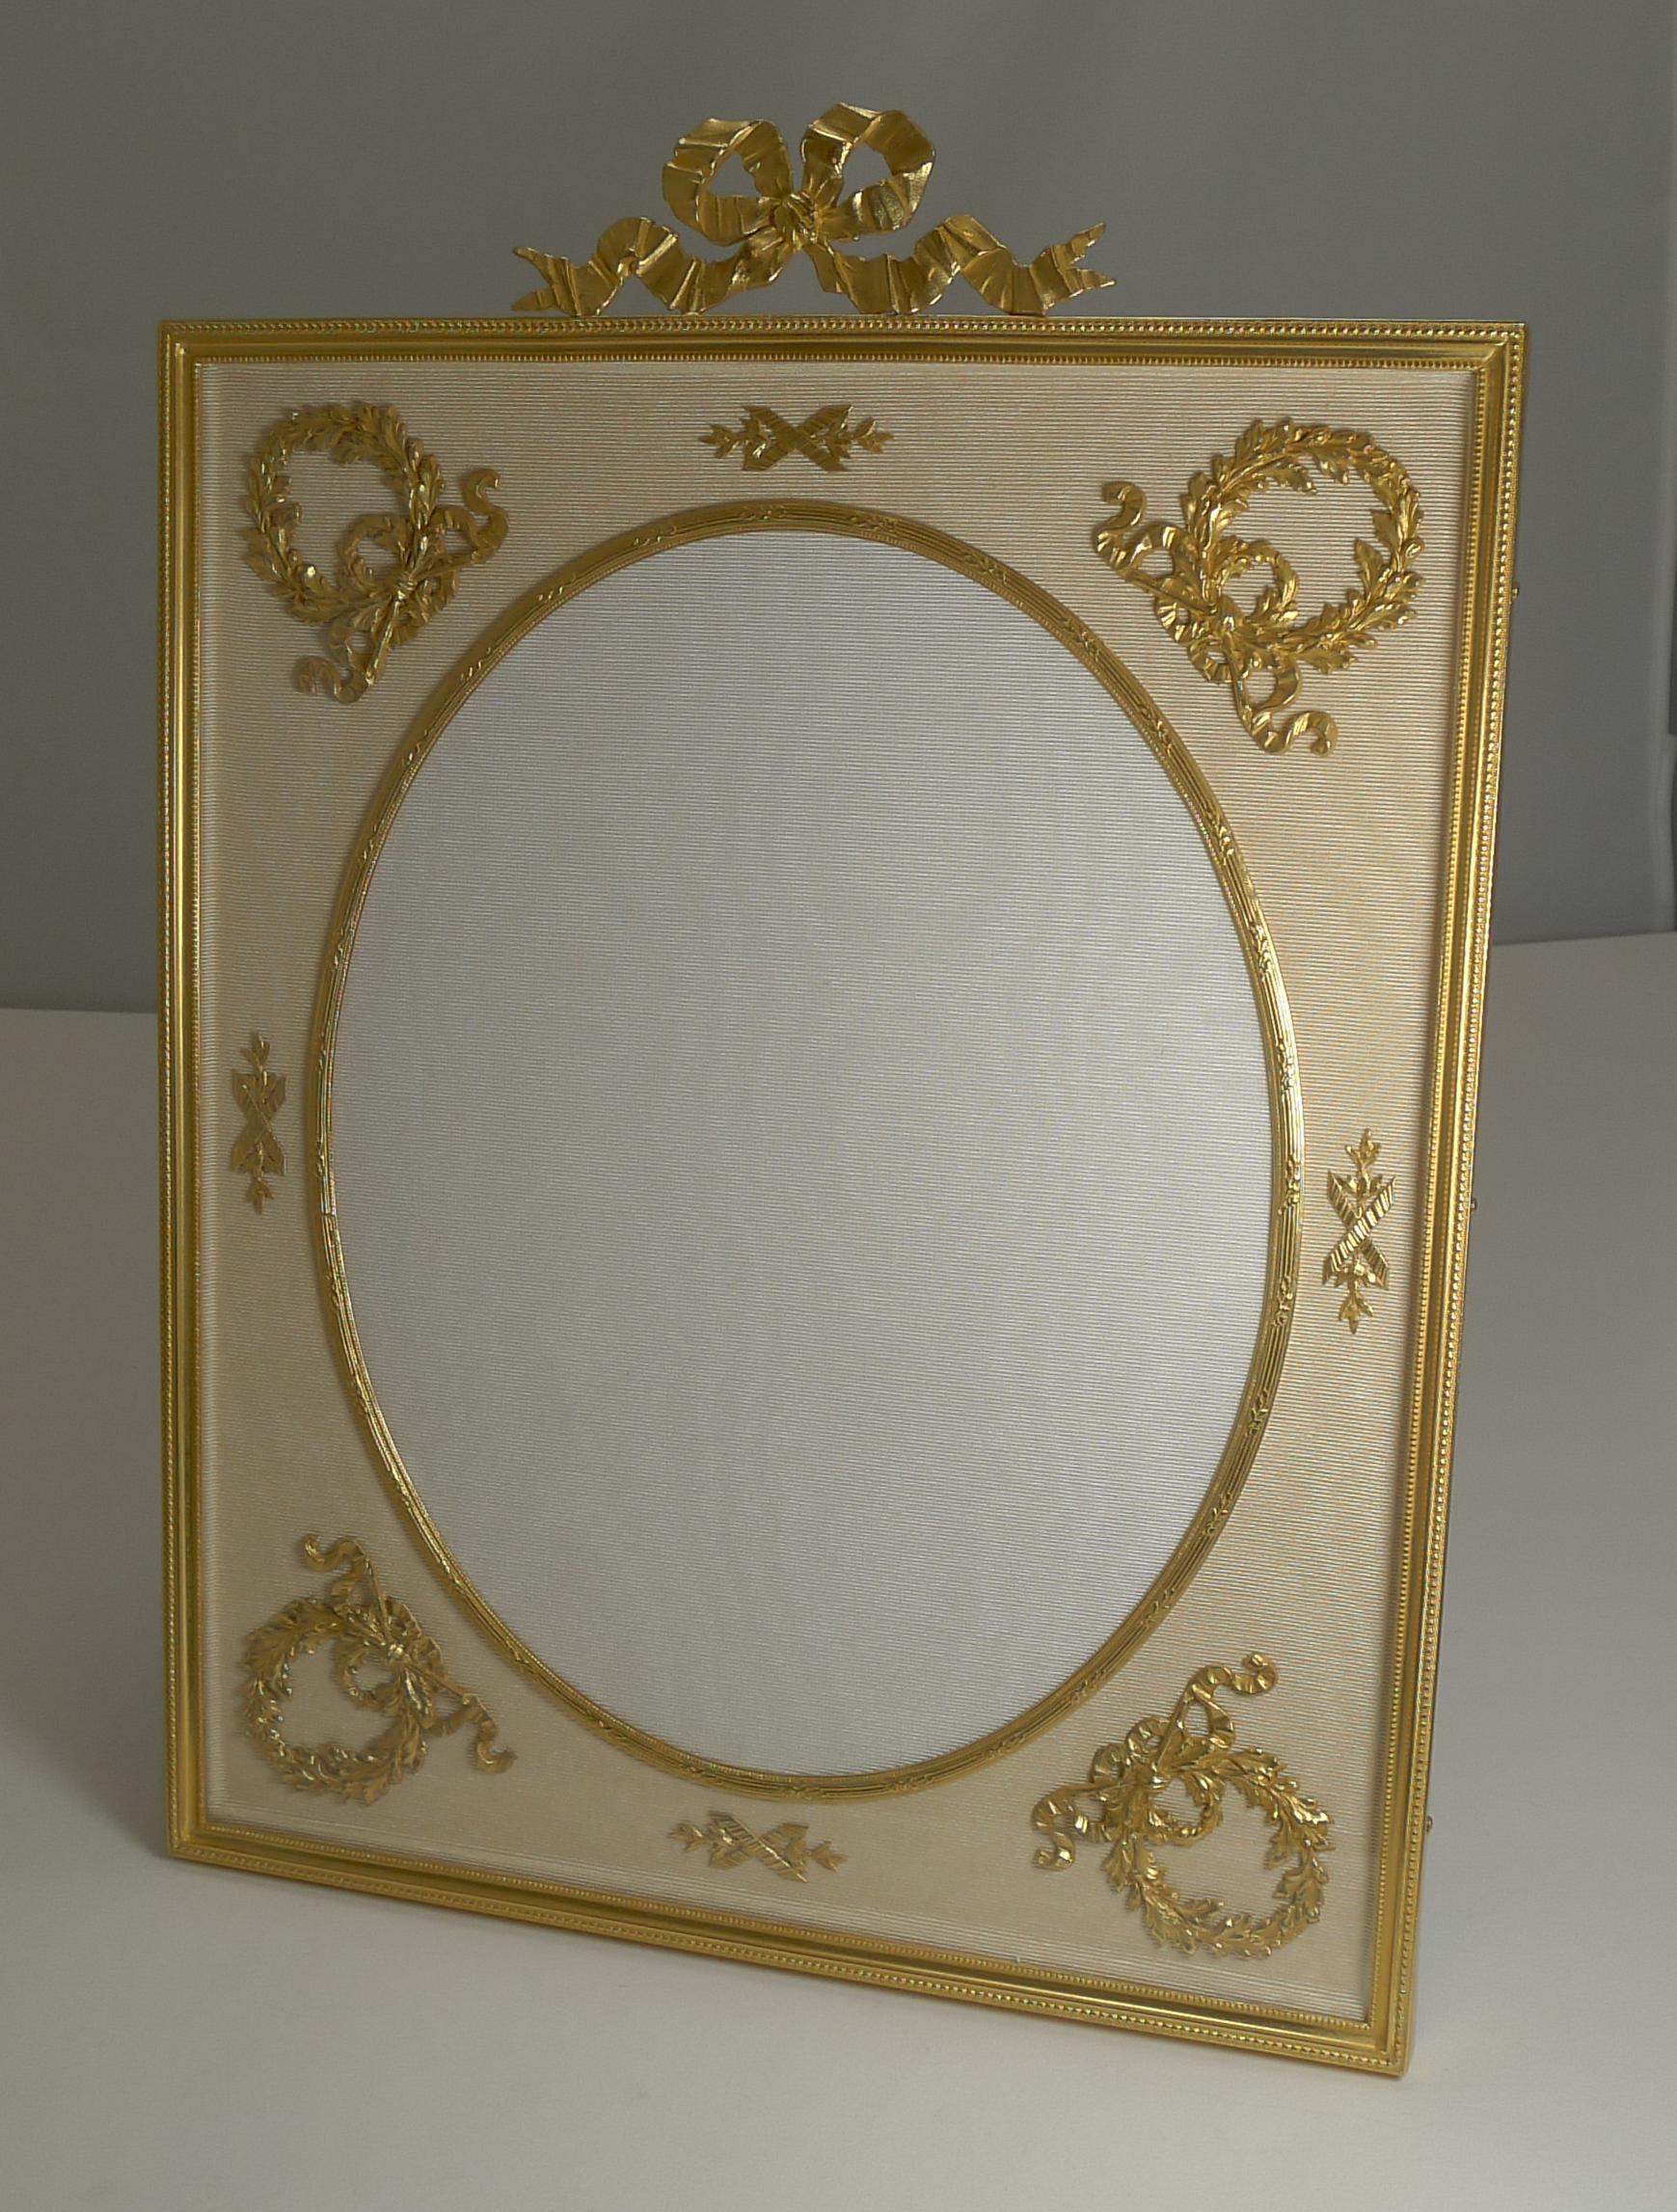 An exquisite and very grand French Ormolu picture frame dating to circa 1900. Made from bronze and smothered in gold, the cream silk taffeta below the glass is mounted with a gilded mounts.

The oval aperture measures 9 3/4